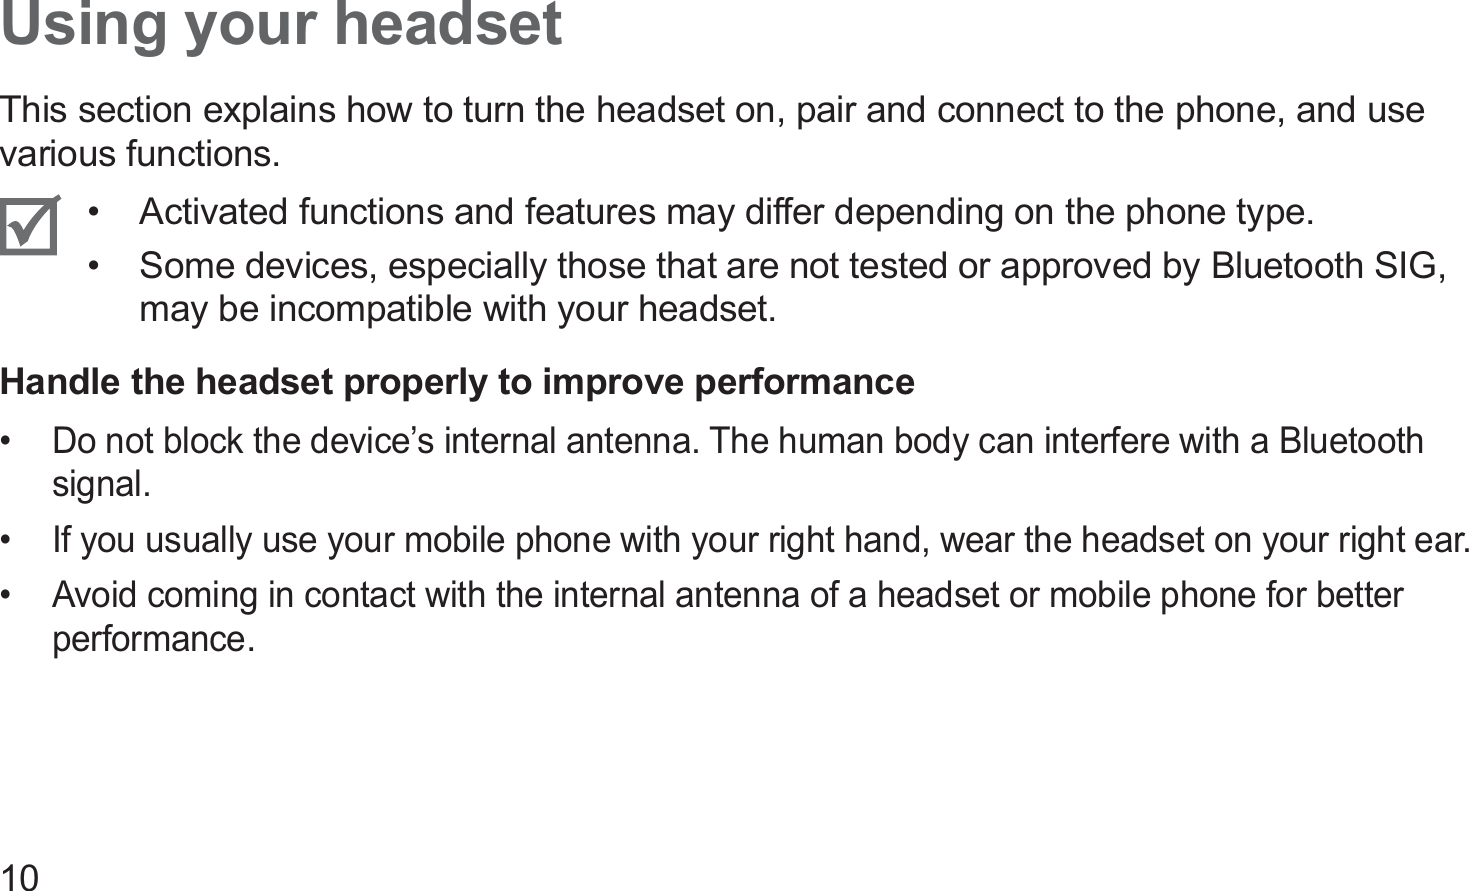 10Using your headsetThis section explains how to turn the headset on, pair and connect to the phone, and use various functions.Activated functions and features may differ depending on the phone type.• Some devices, especially those that are not tested or approved by Bluetooth SIG, • may be incompatible with your headset.Handle the headset properly to improve performanceDo not block the device’s internal antenna. The human body can interfere with a Bluetooth • signal.If you usually use your mobile phone with your right hand, wear the headset on your right ear.• Avoid coming in contact with the internal antenna of a headset or mobile phone for better • performance.